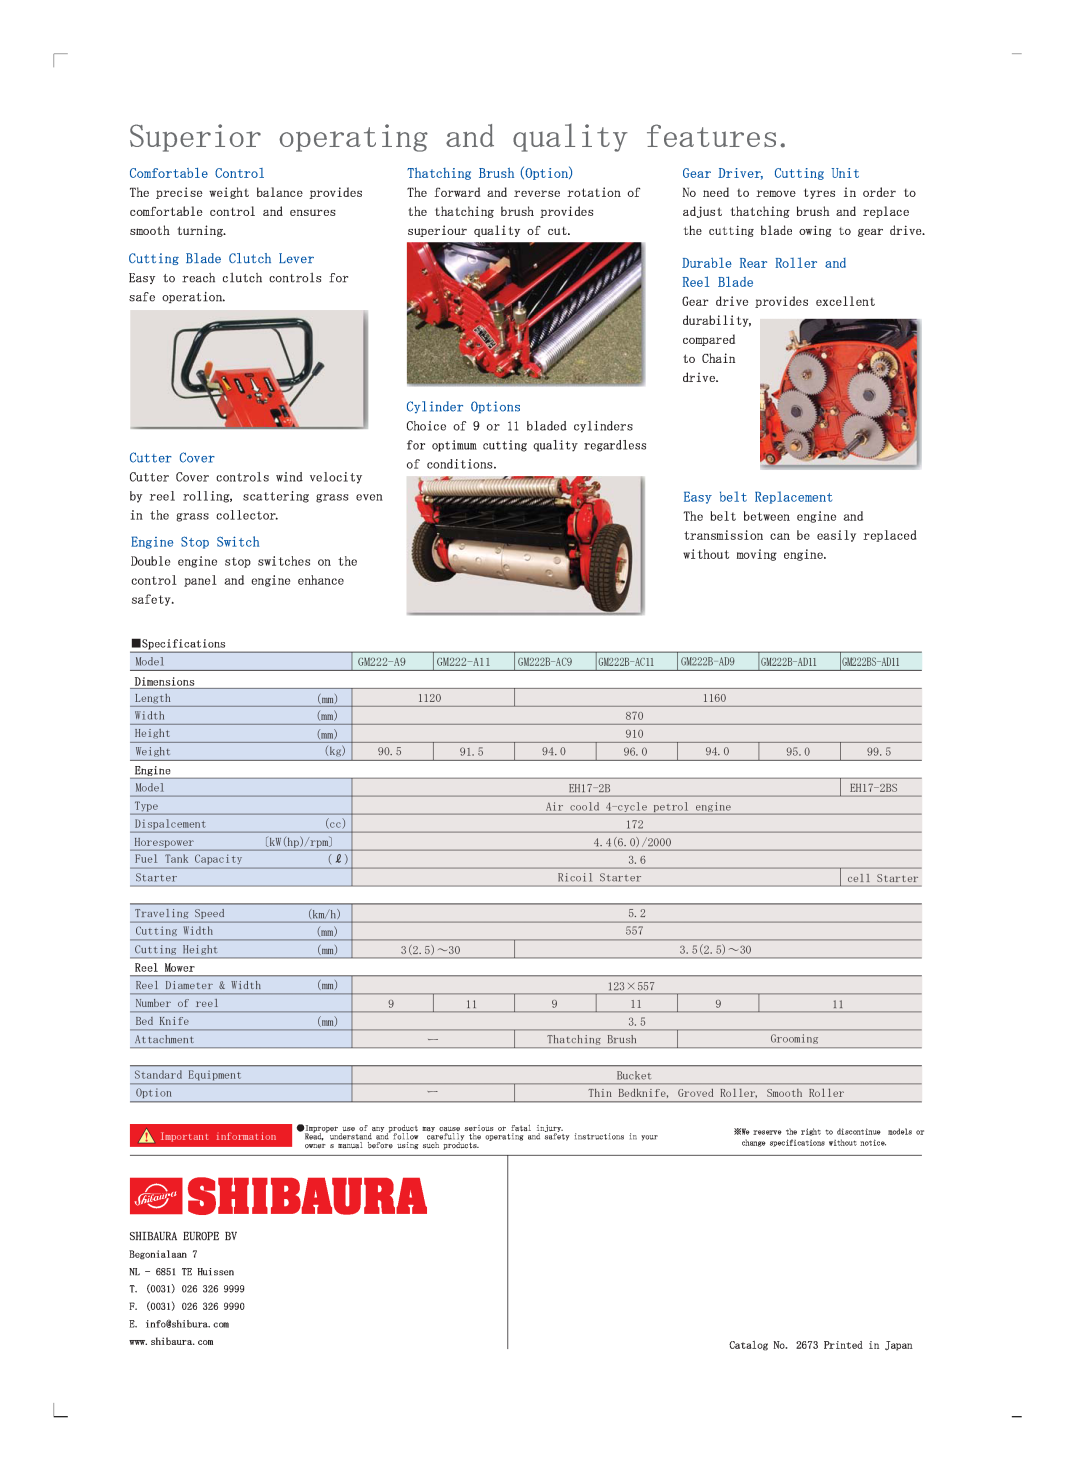 Shibaura GM222 Superior operating and quality features, Comfortable Control, Thatching Brush （Option ）, Cylinder Options 